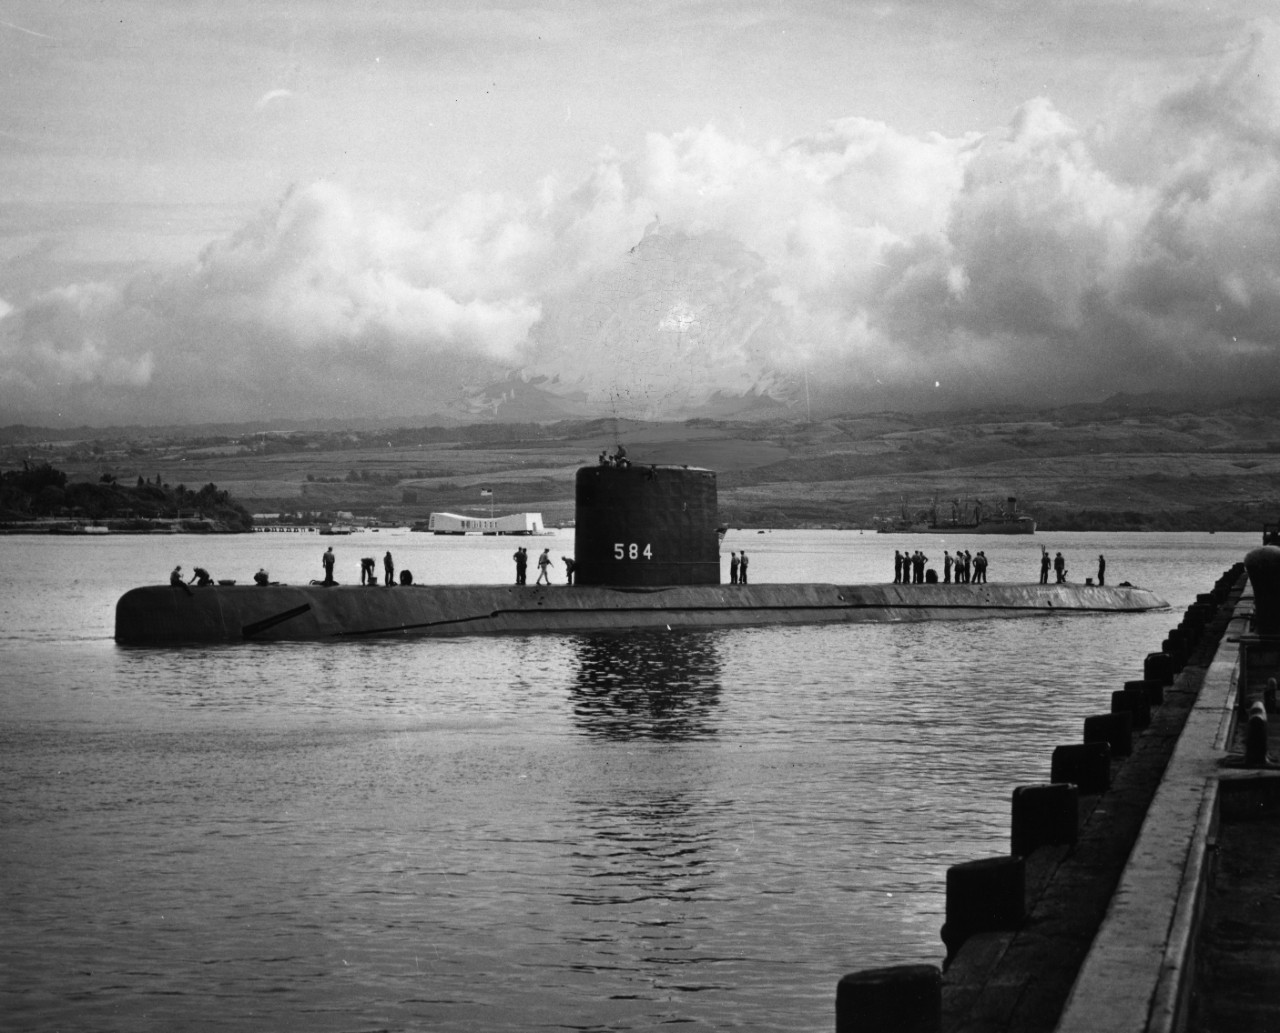 Nuclear powered attack submarine USS Seadragon (SSN-584) in Pearl Harbor Naval Shipyard, Oahu, Hawaii. In the background is Ford Island and the USS Arizona Memorial.